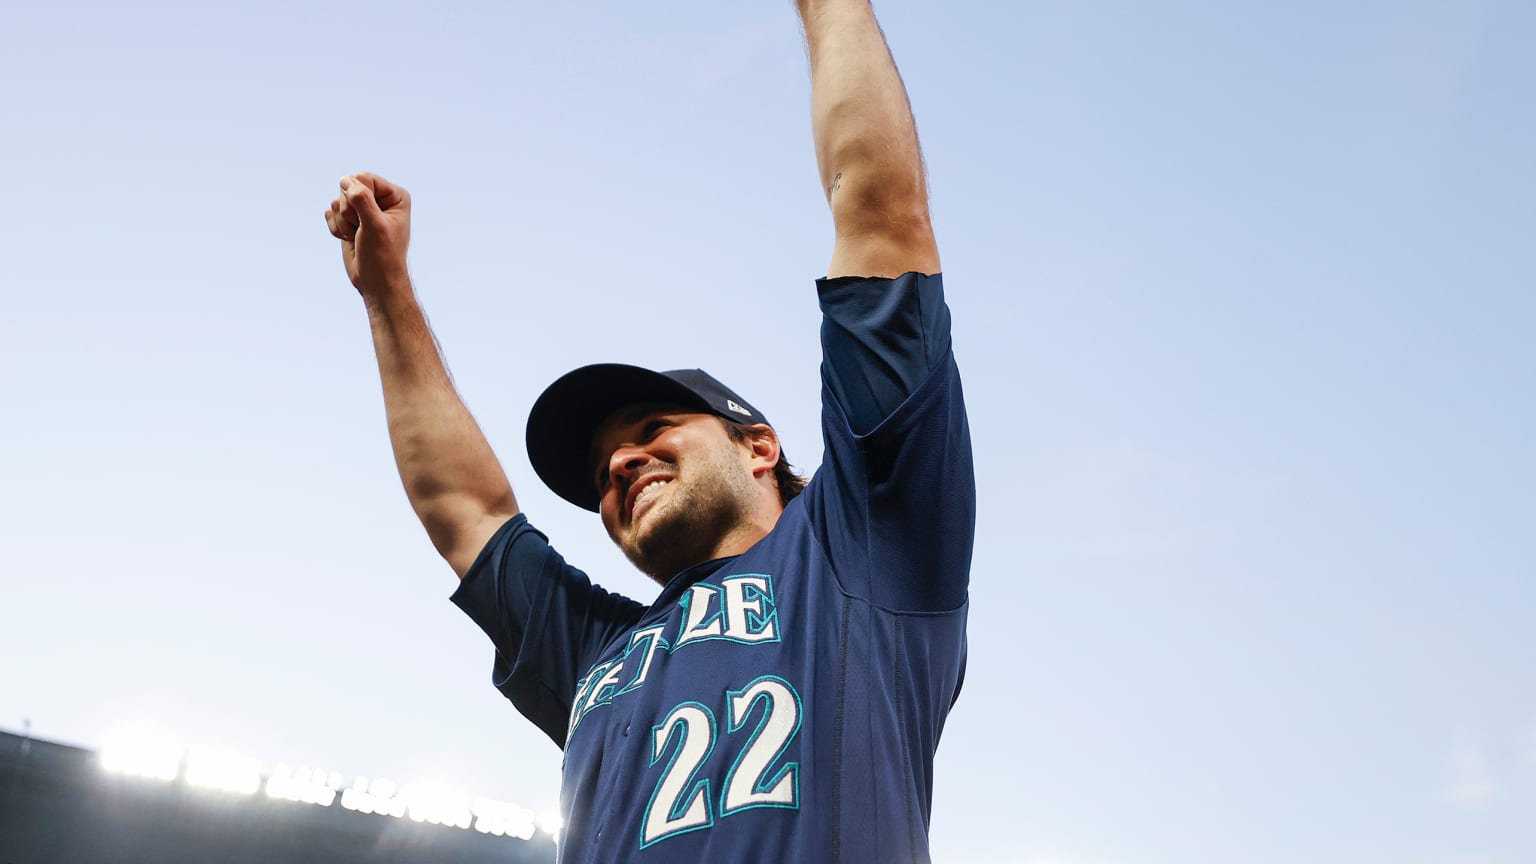 Luis Torrens, in a blue Mariners jersey, smiles and raises his arms to the sky celebrating a victory